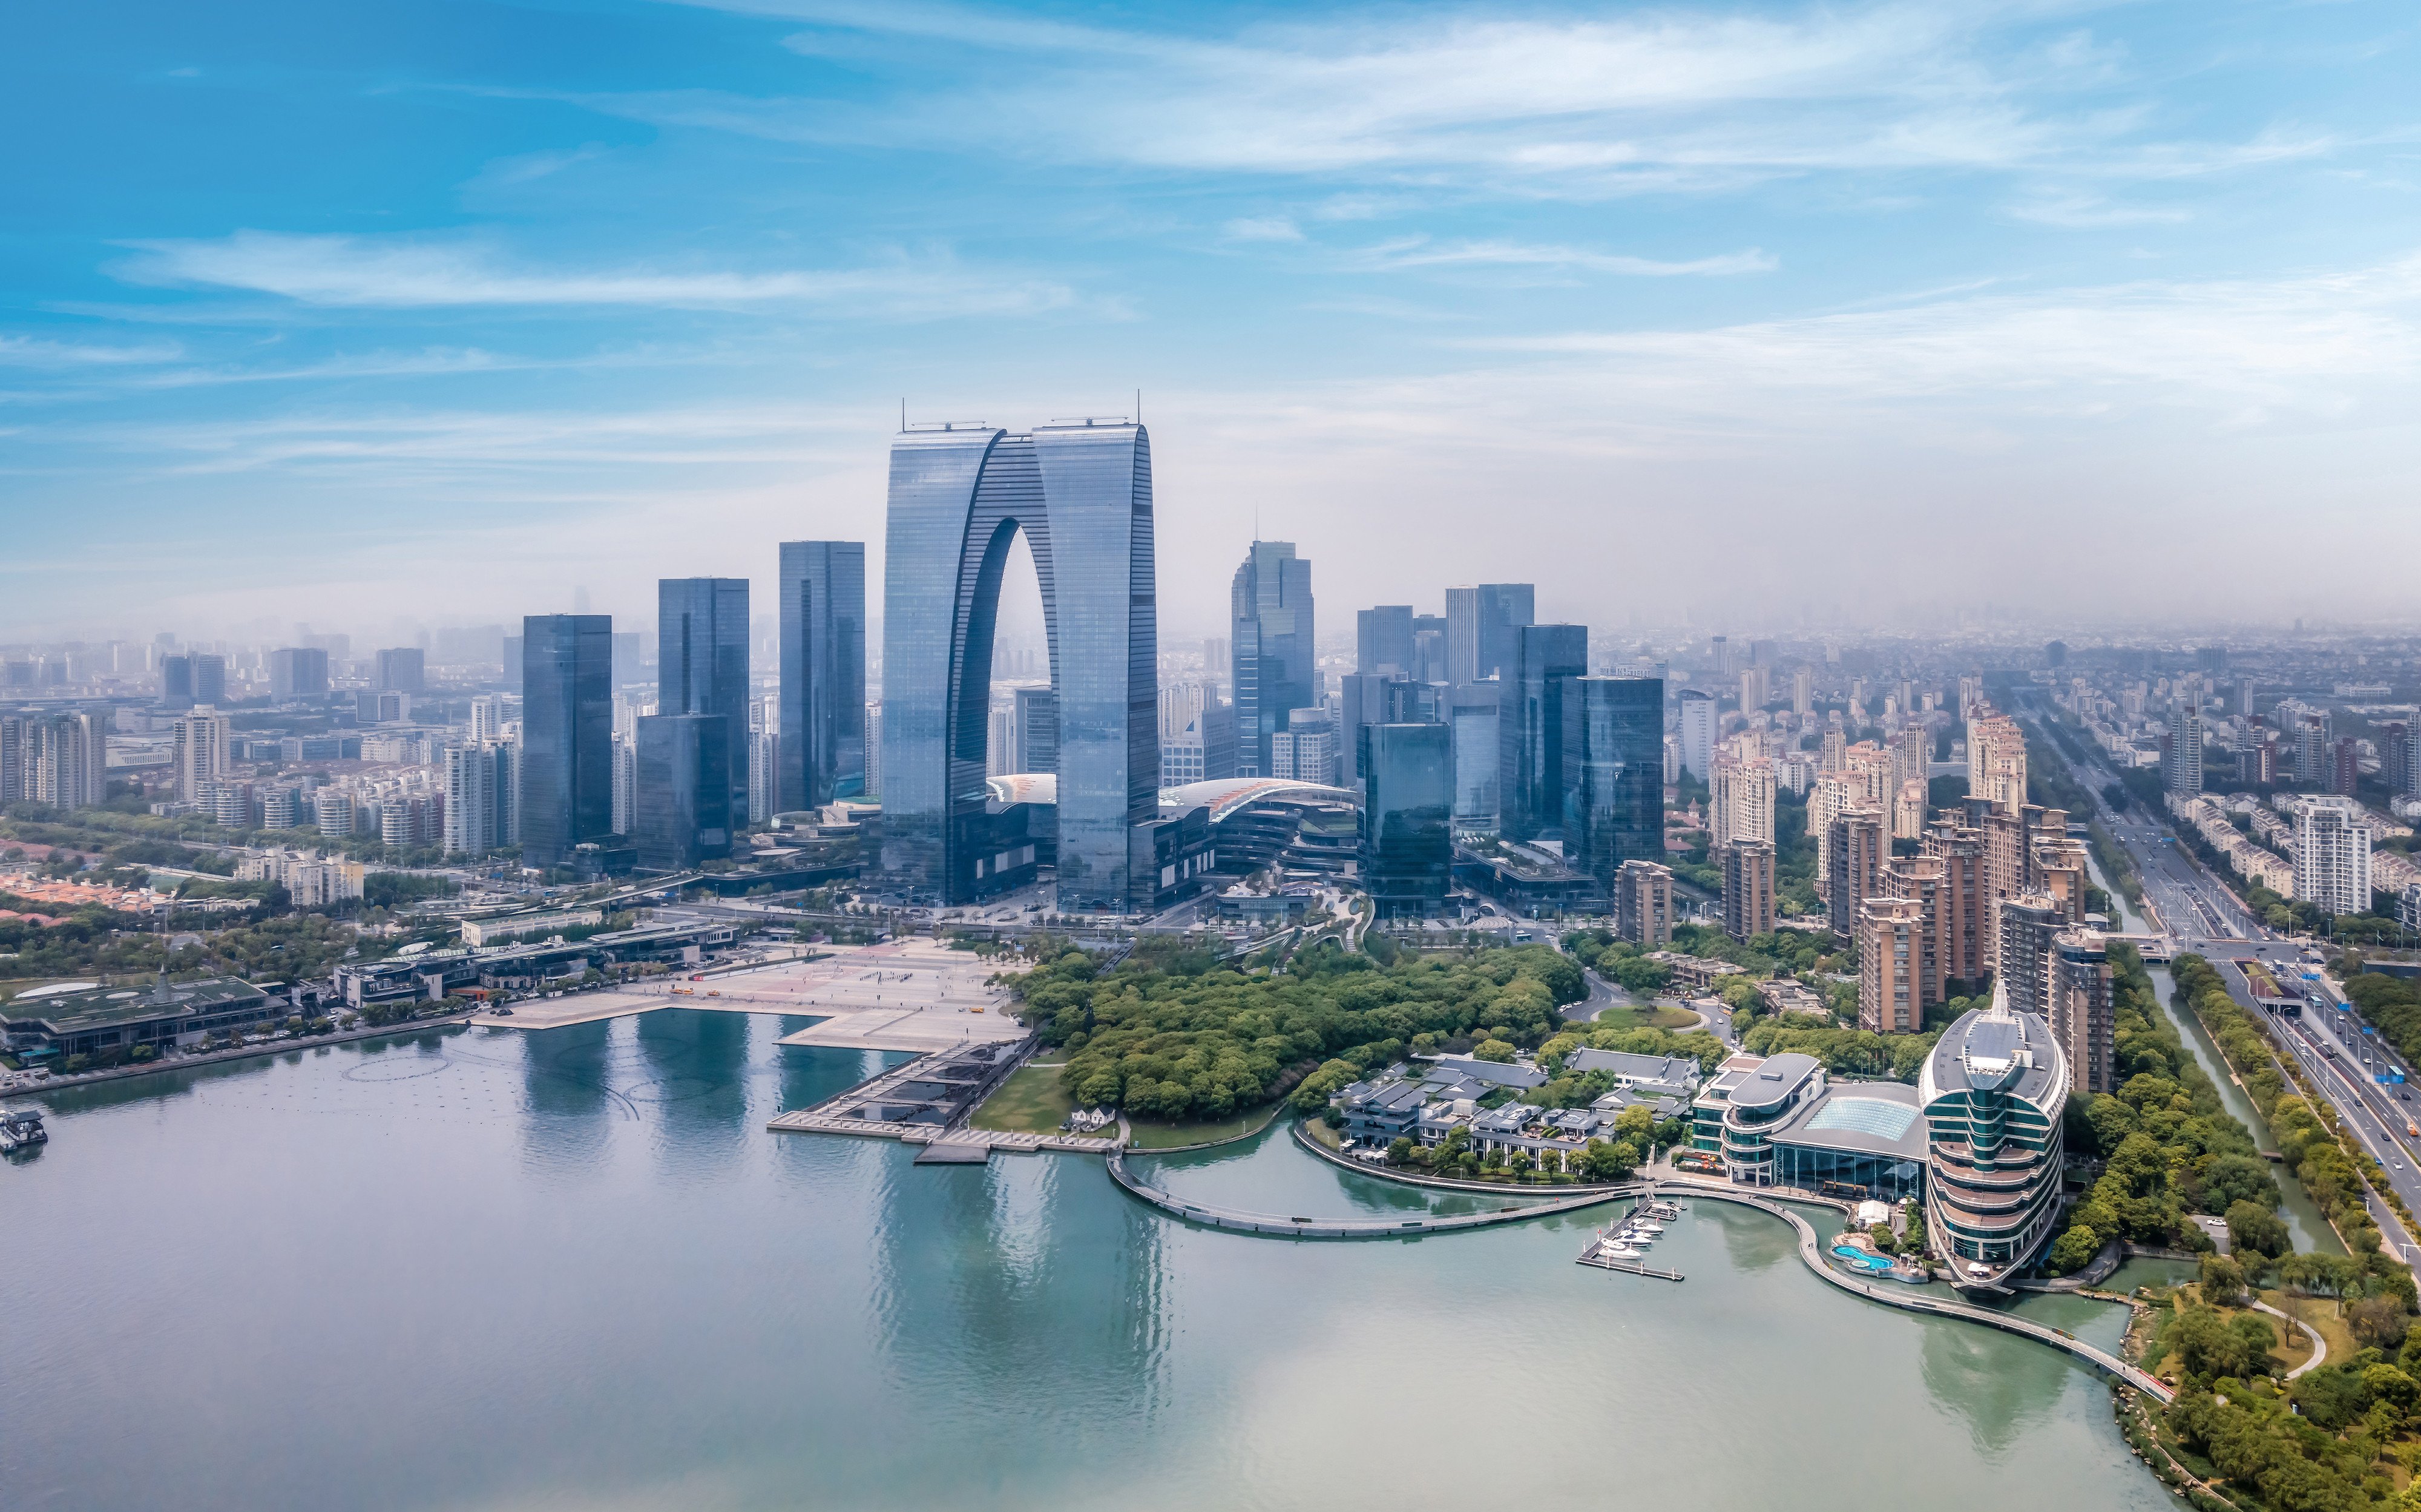 A bird’s-eye view of the central business district of Suzhou, the most populous city in eastern Jiangsu province, which serves as a major hi-tech manufacturing hub. Photo: Shutterstock